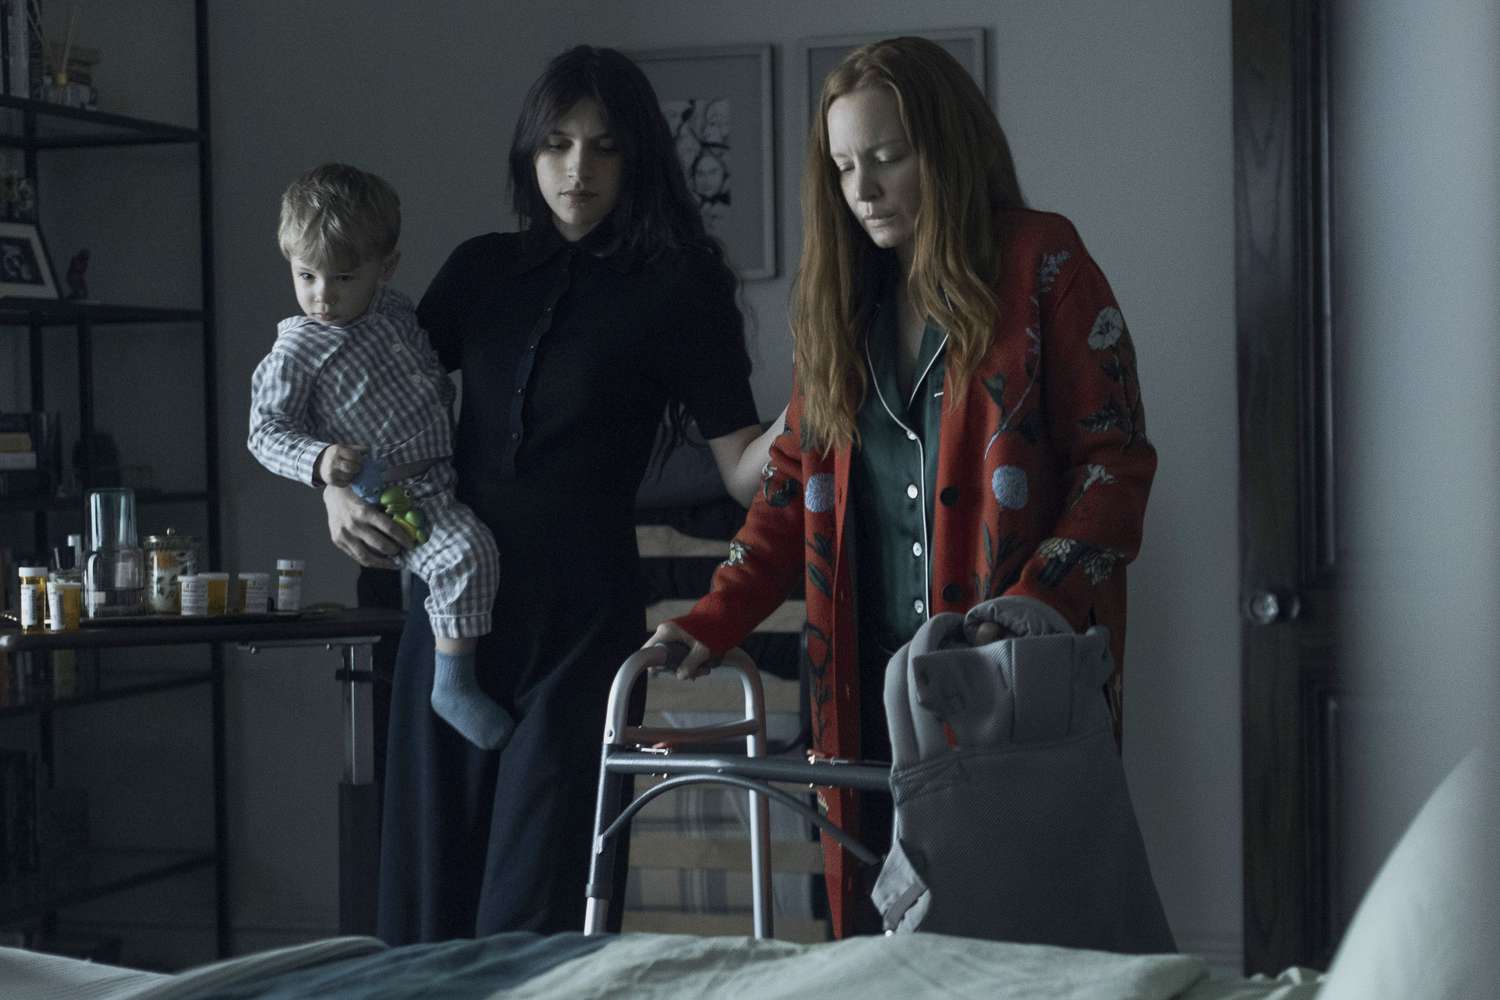 Nell Tiger Free and Lauren Ambrose in "Servant," now streaming on Apple TV+